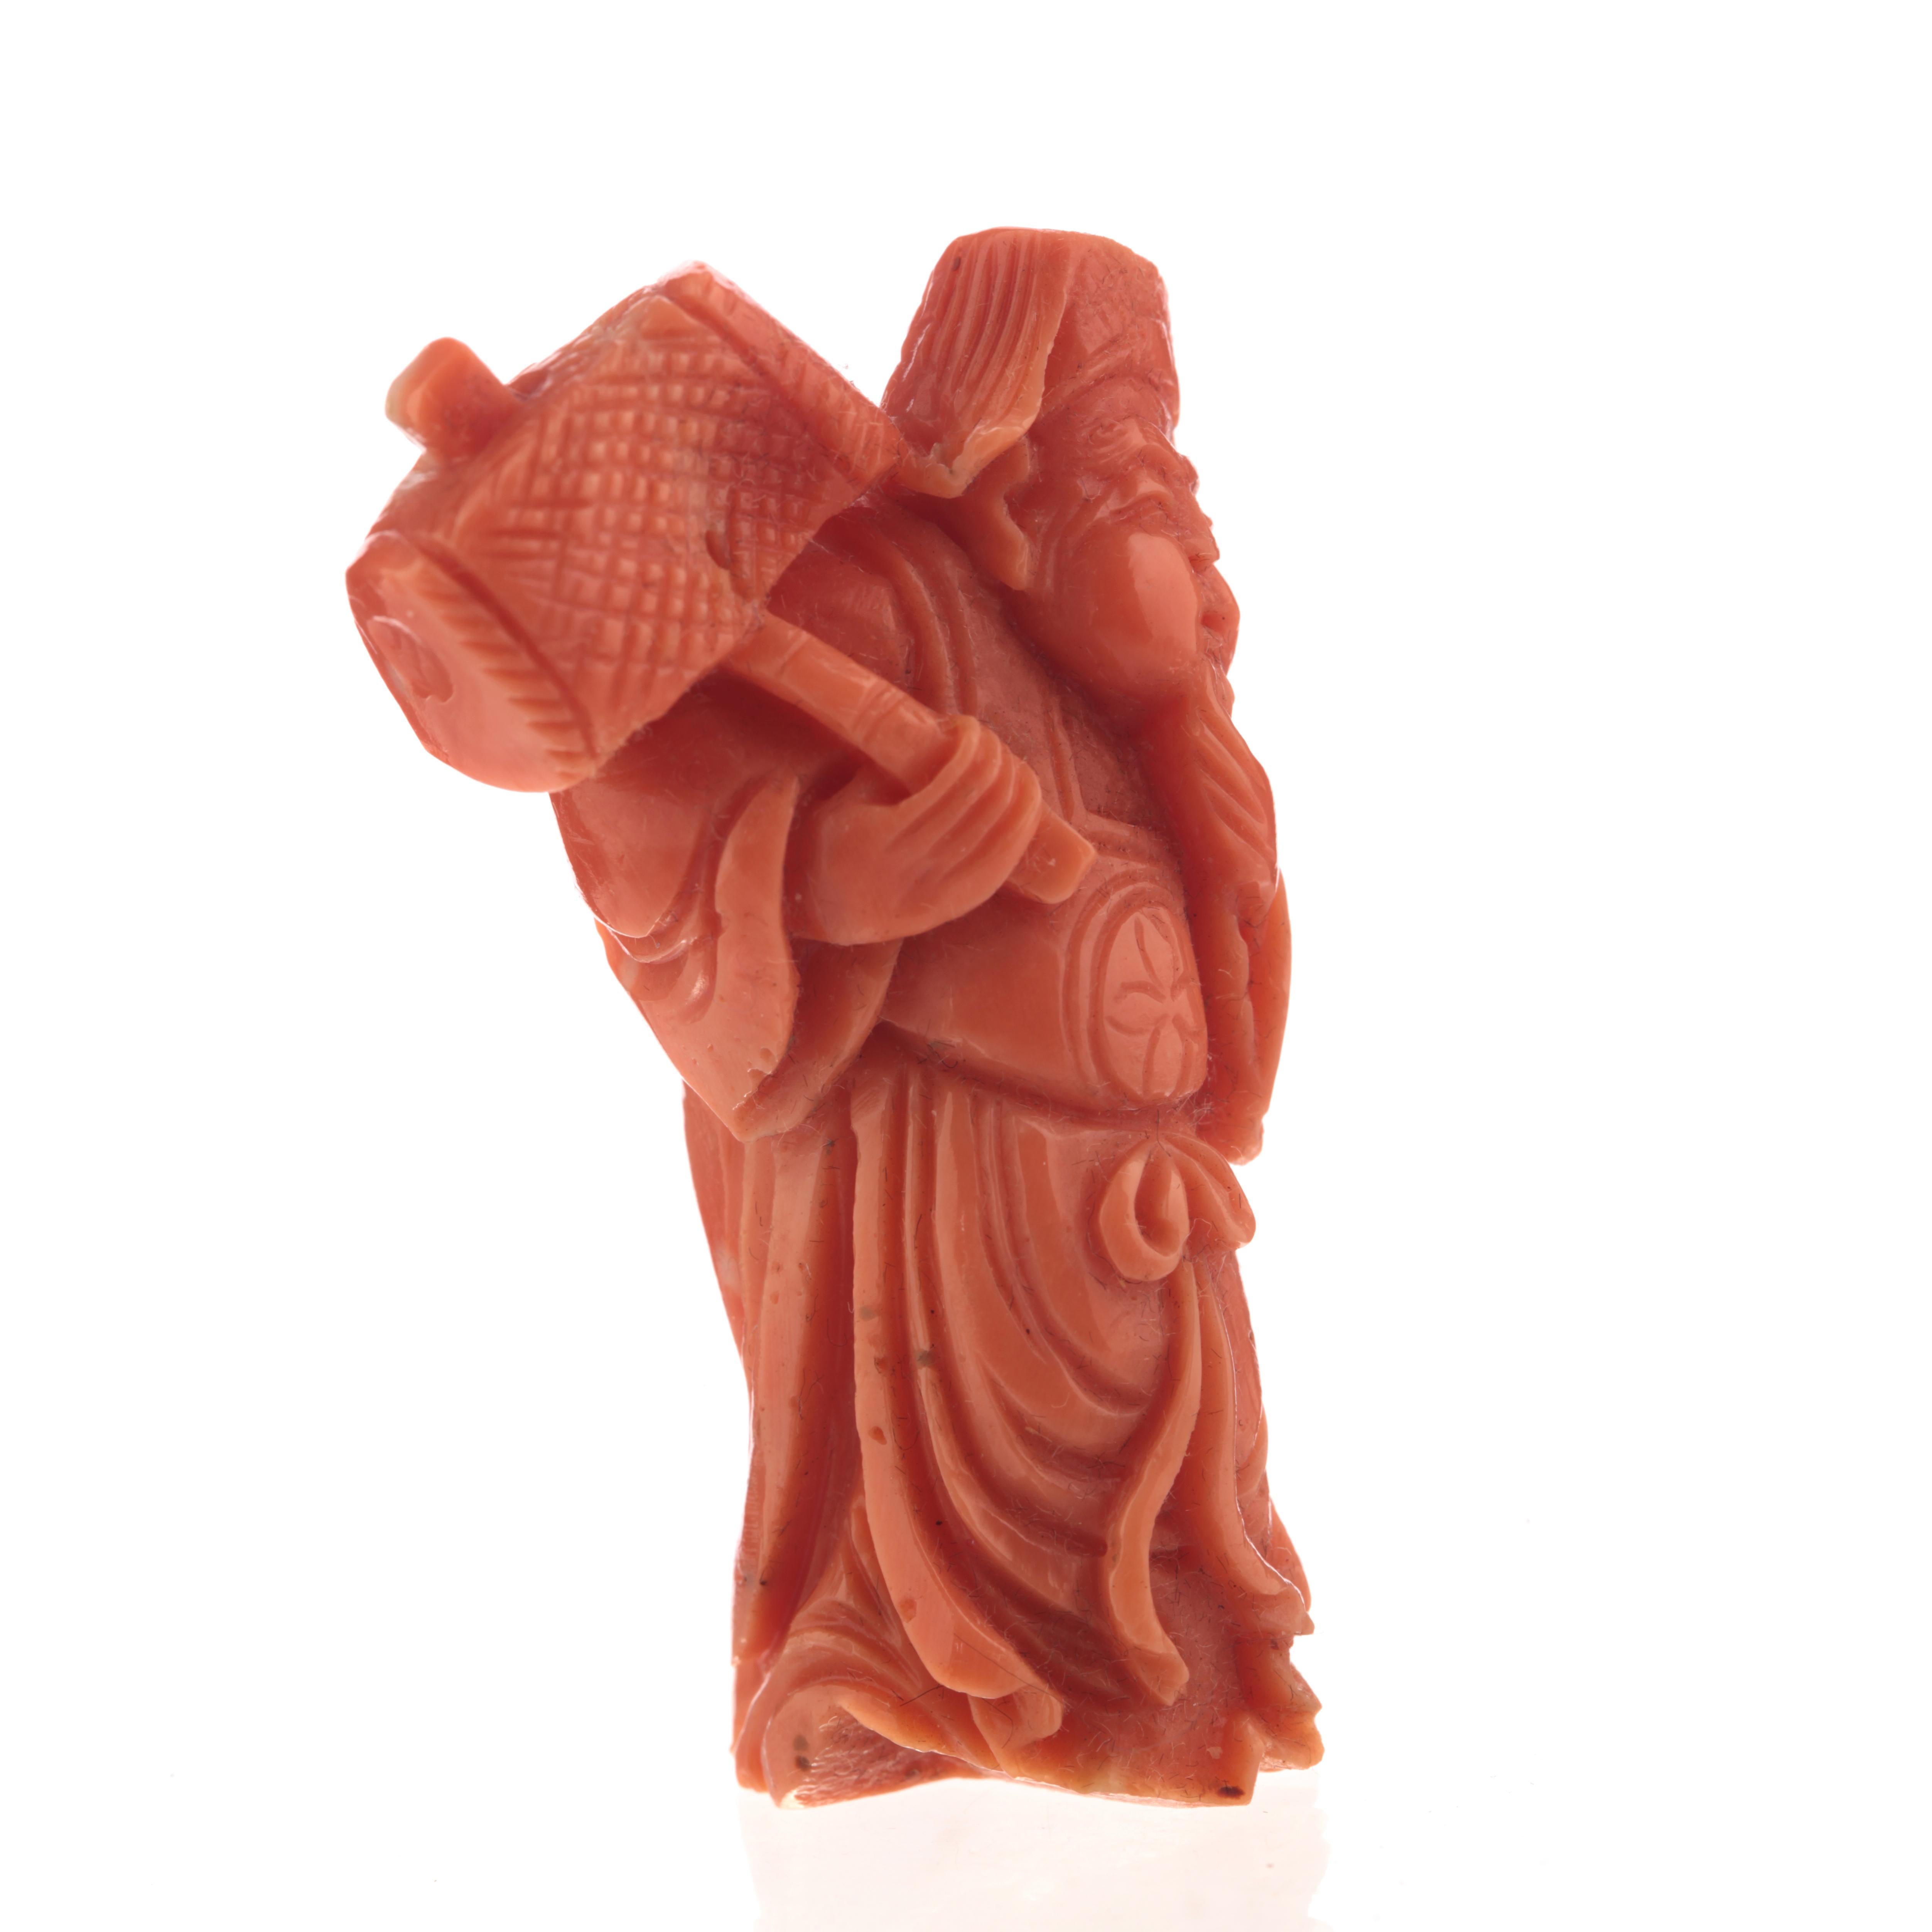 Wise Man Buddhist Carved Asian Decorative Art Statue Sculpture Natural Red Coral In Excellent Condition For Sale In Milano, IT